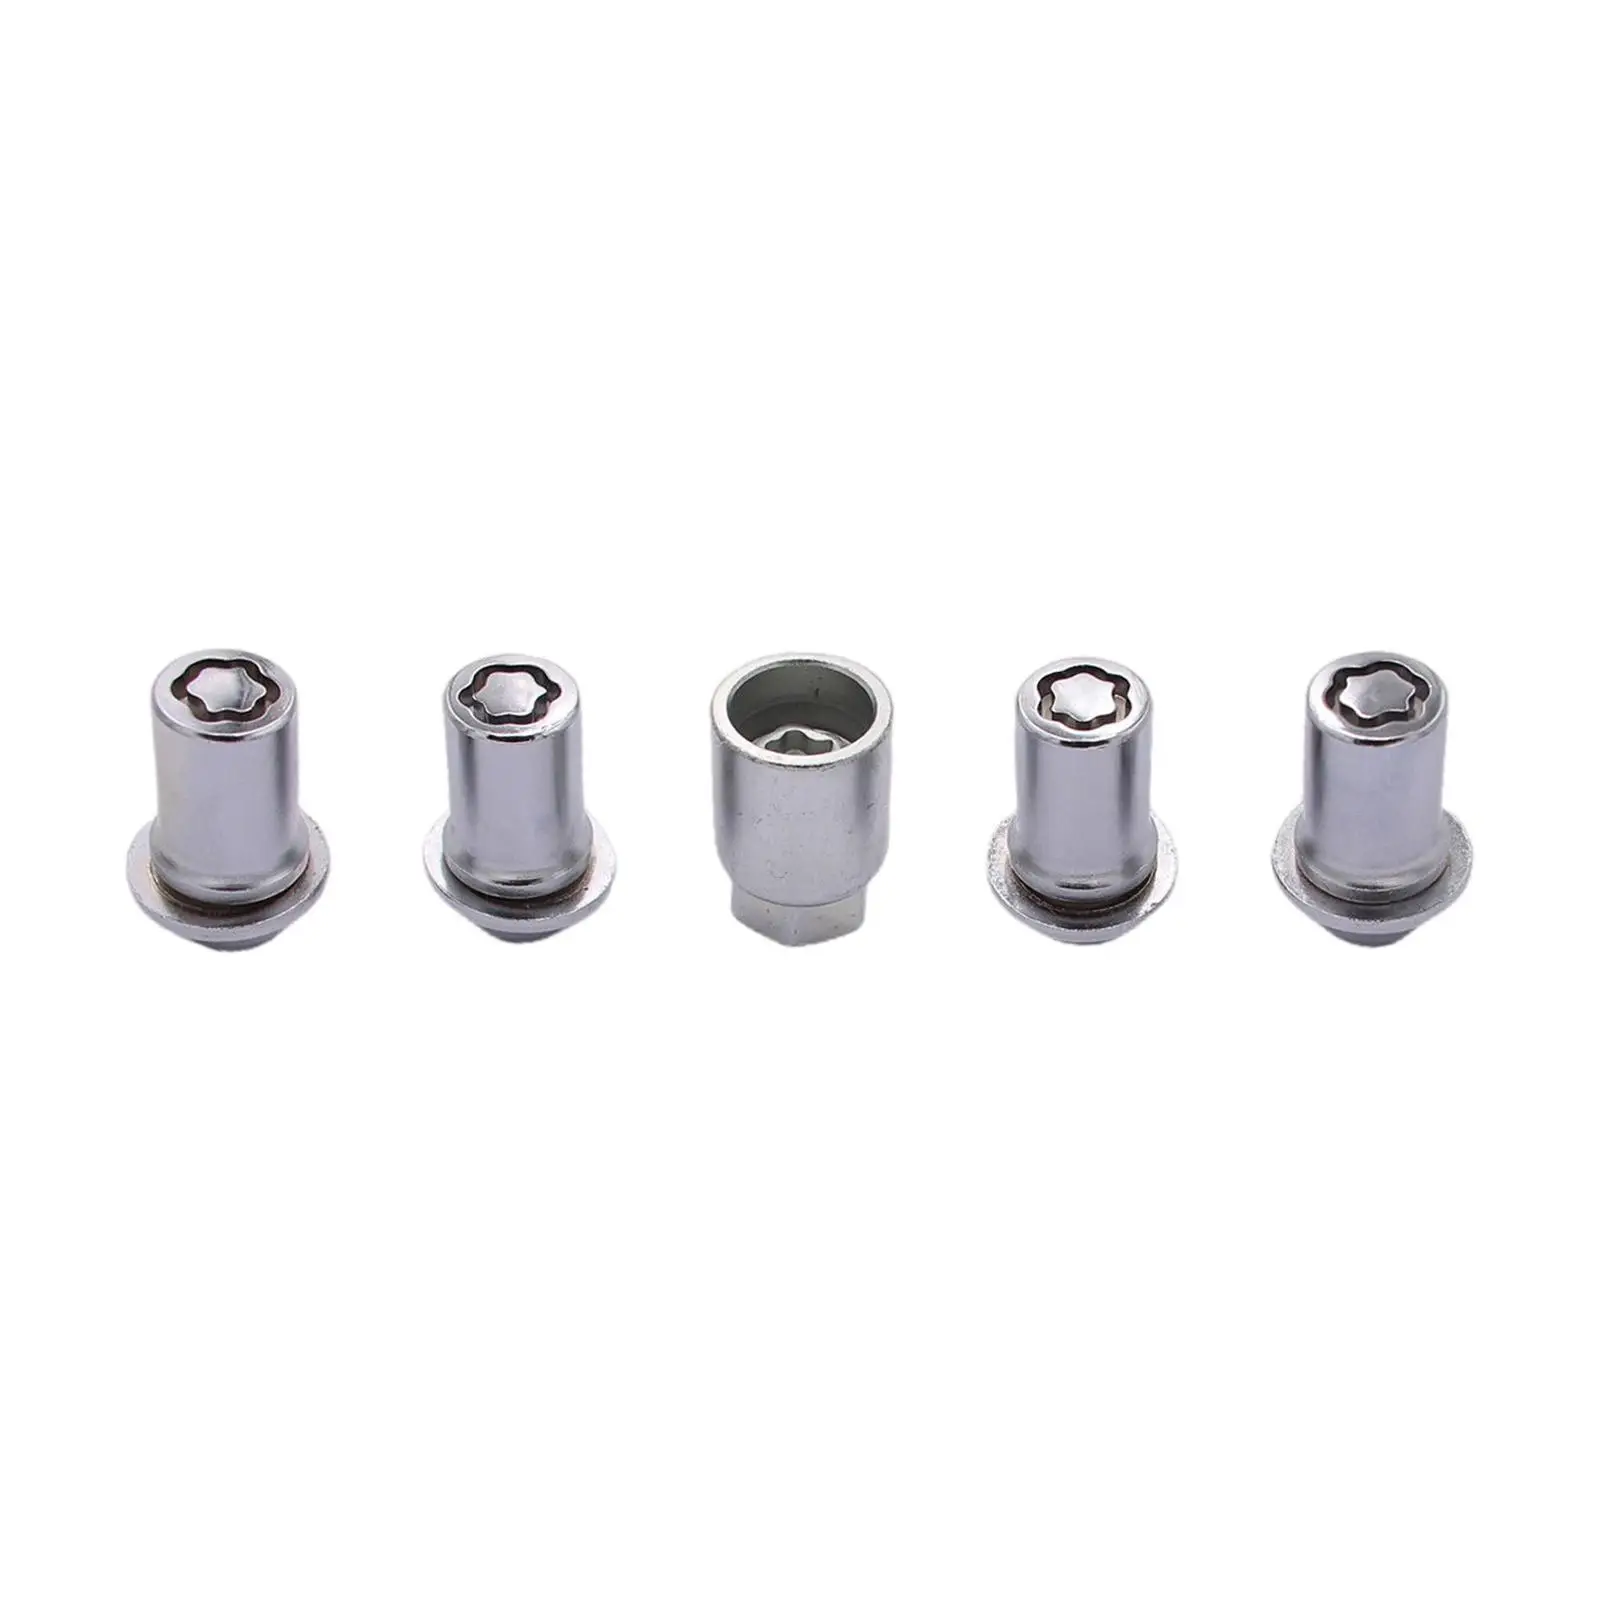 Wheel Lock Set 00276-00901 Accessory Professional Replaces Spare Parts Assembly Easy to Install Hardware for 4Runner